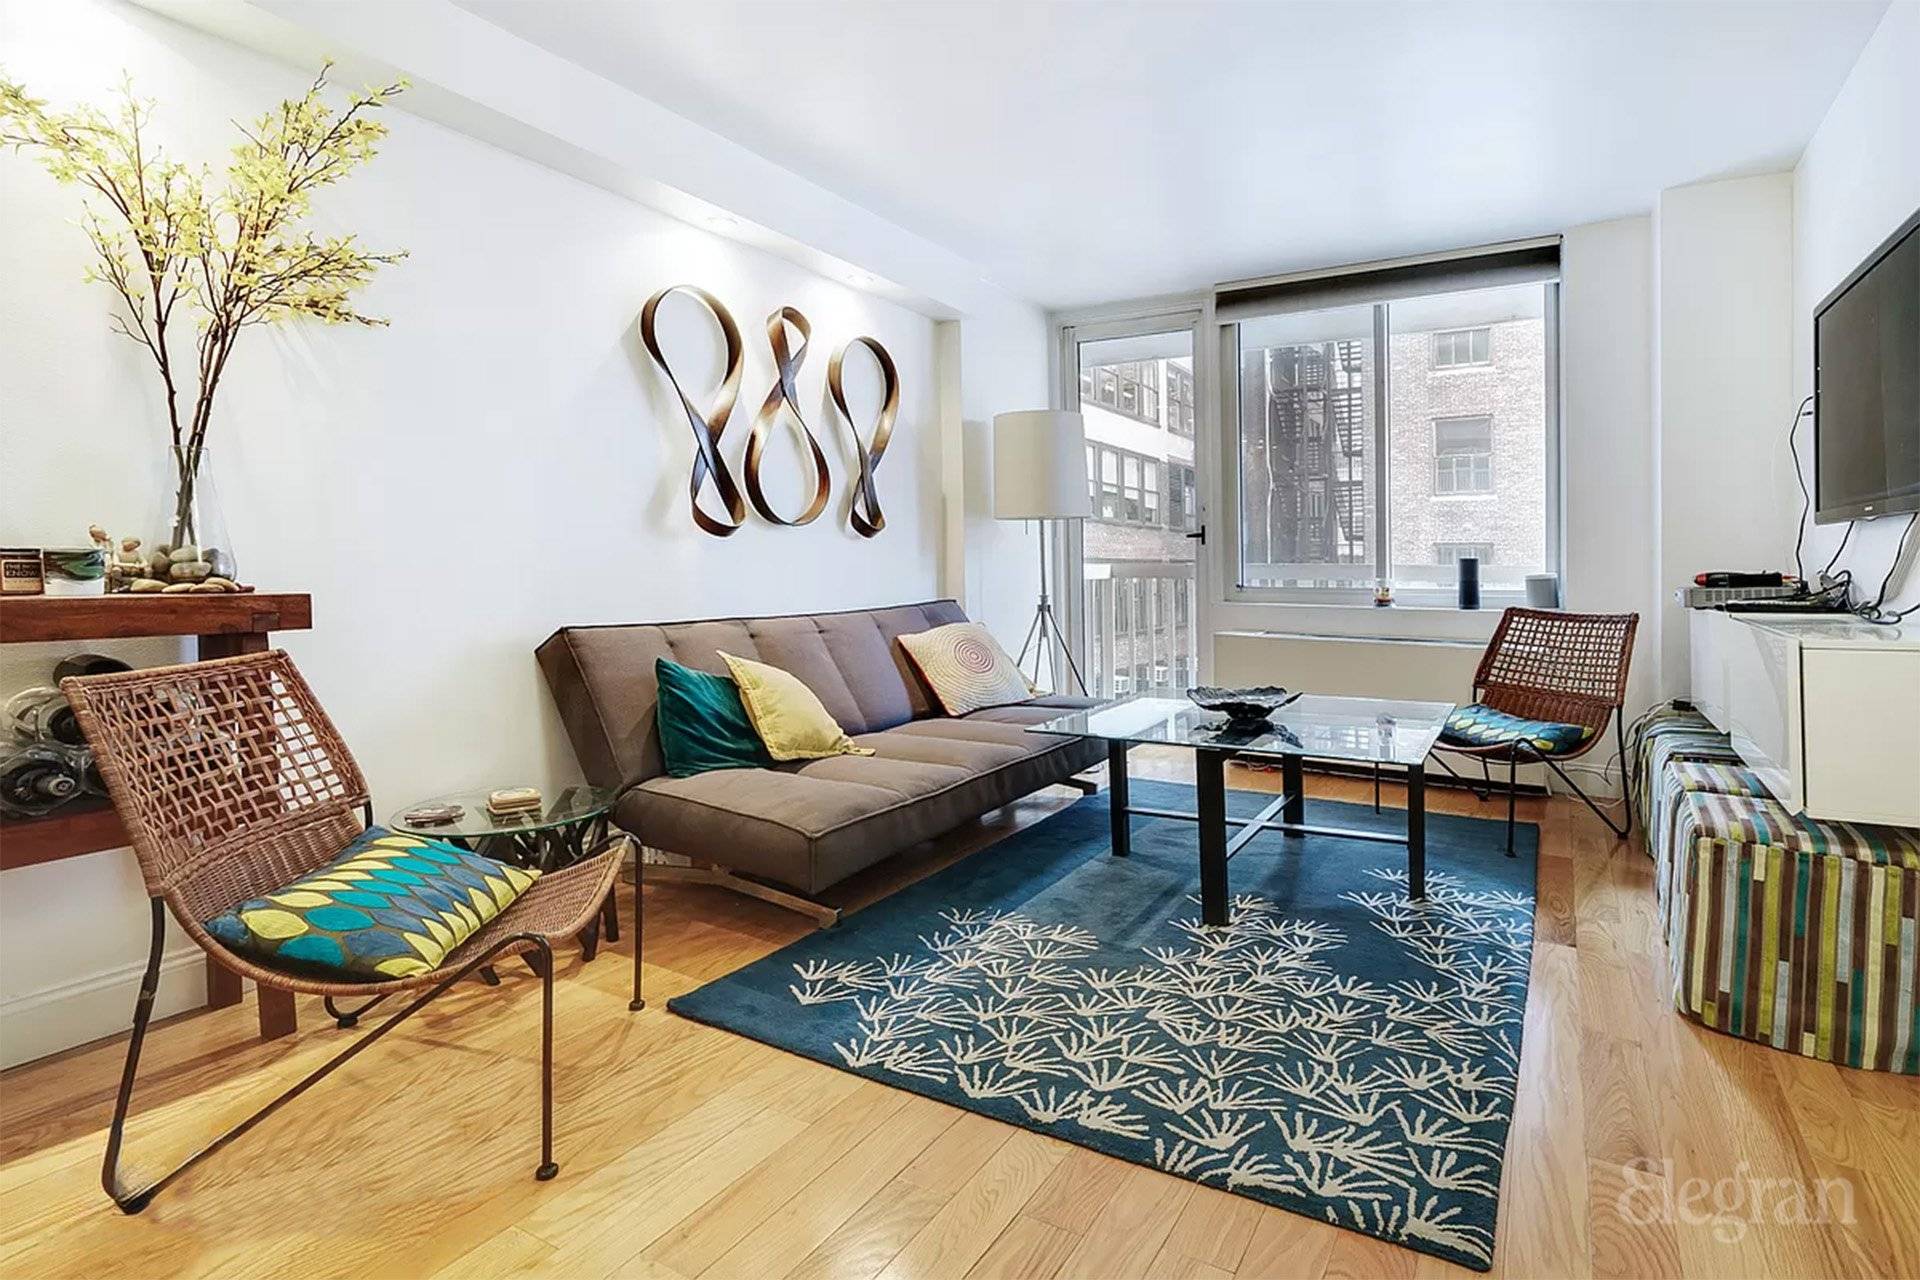 This is a stunning 1 bed 1 bath, fully renovated with condo finishes and a private balcony.